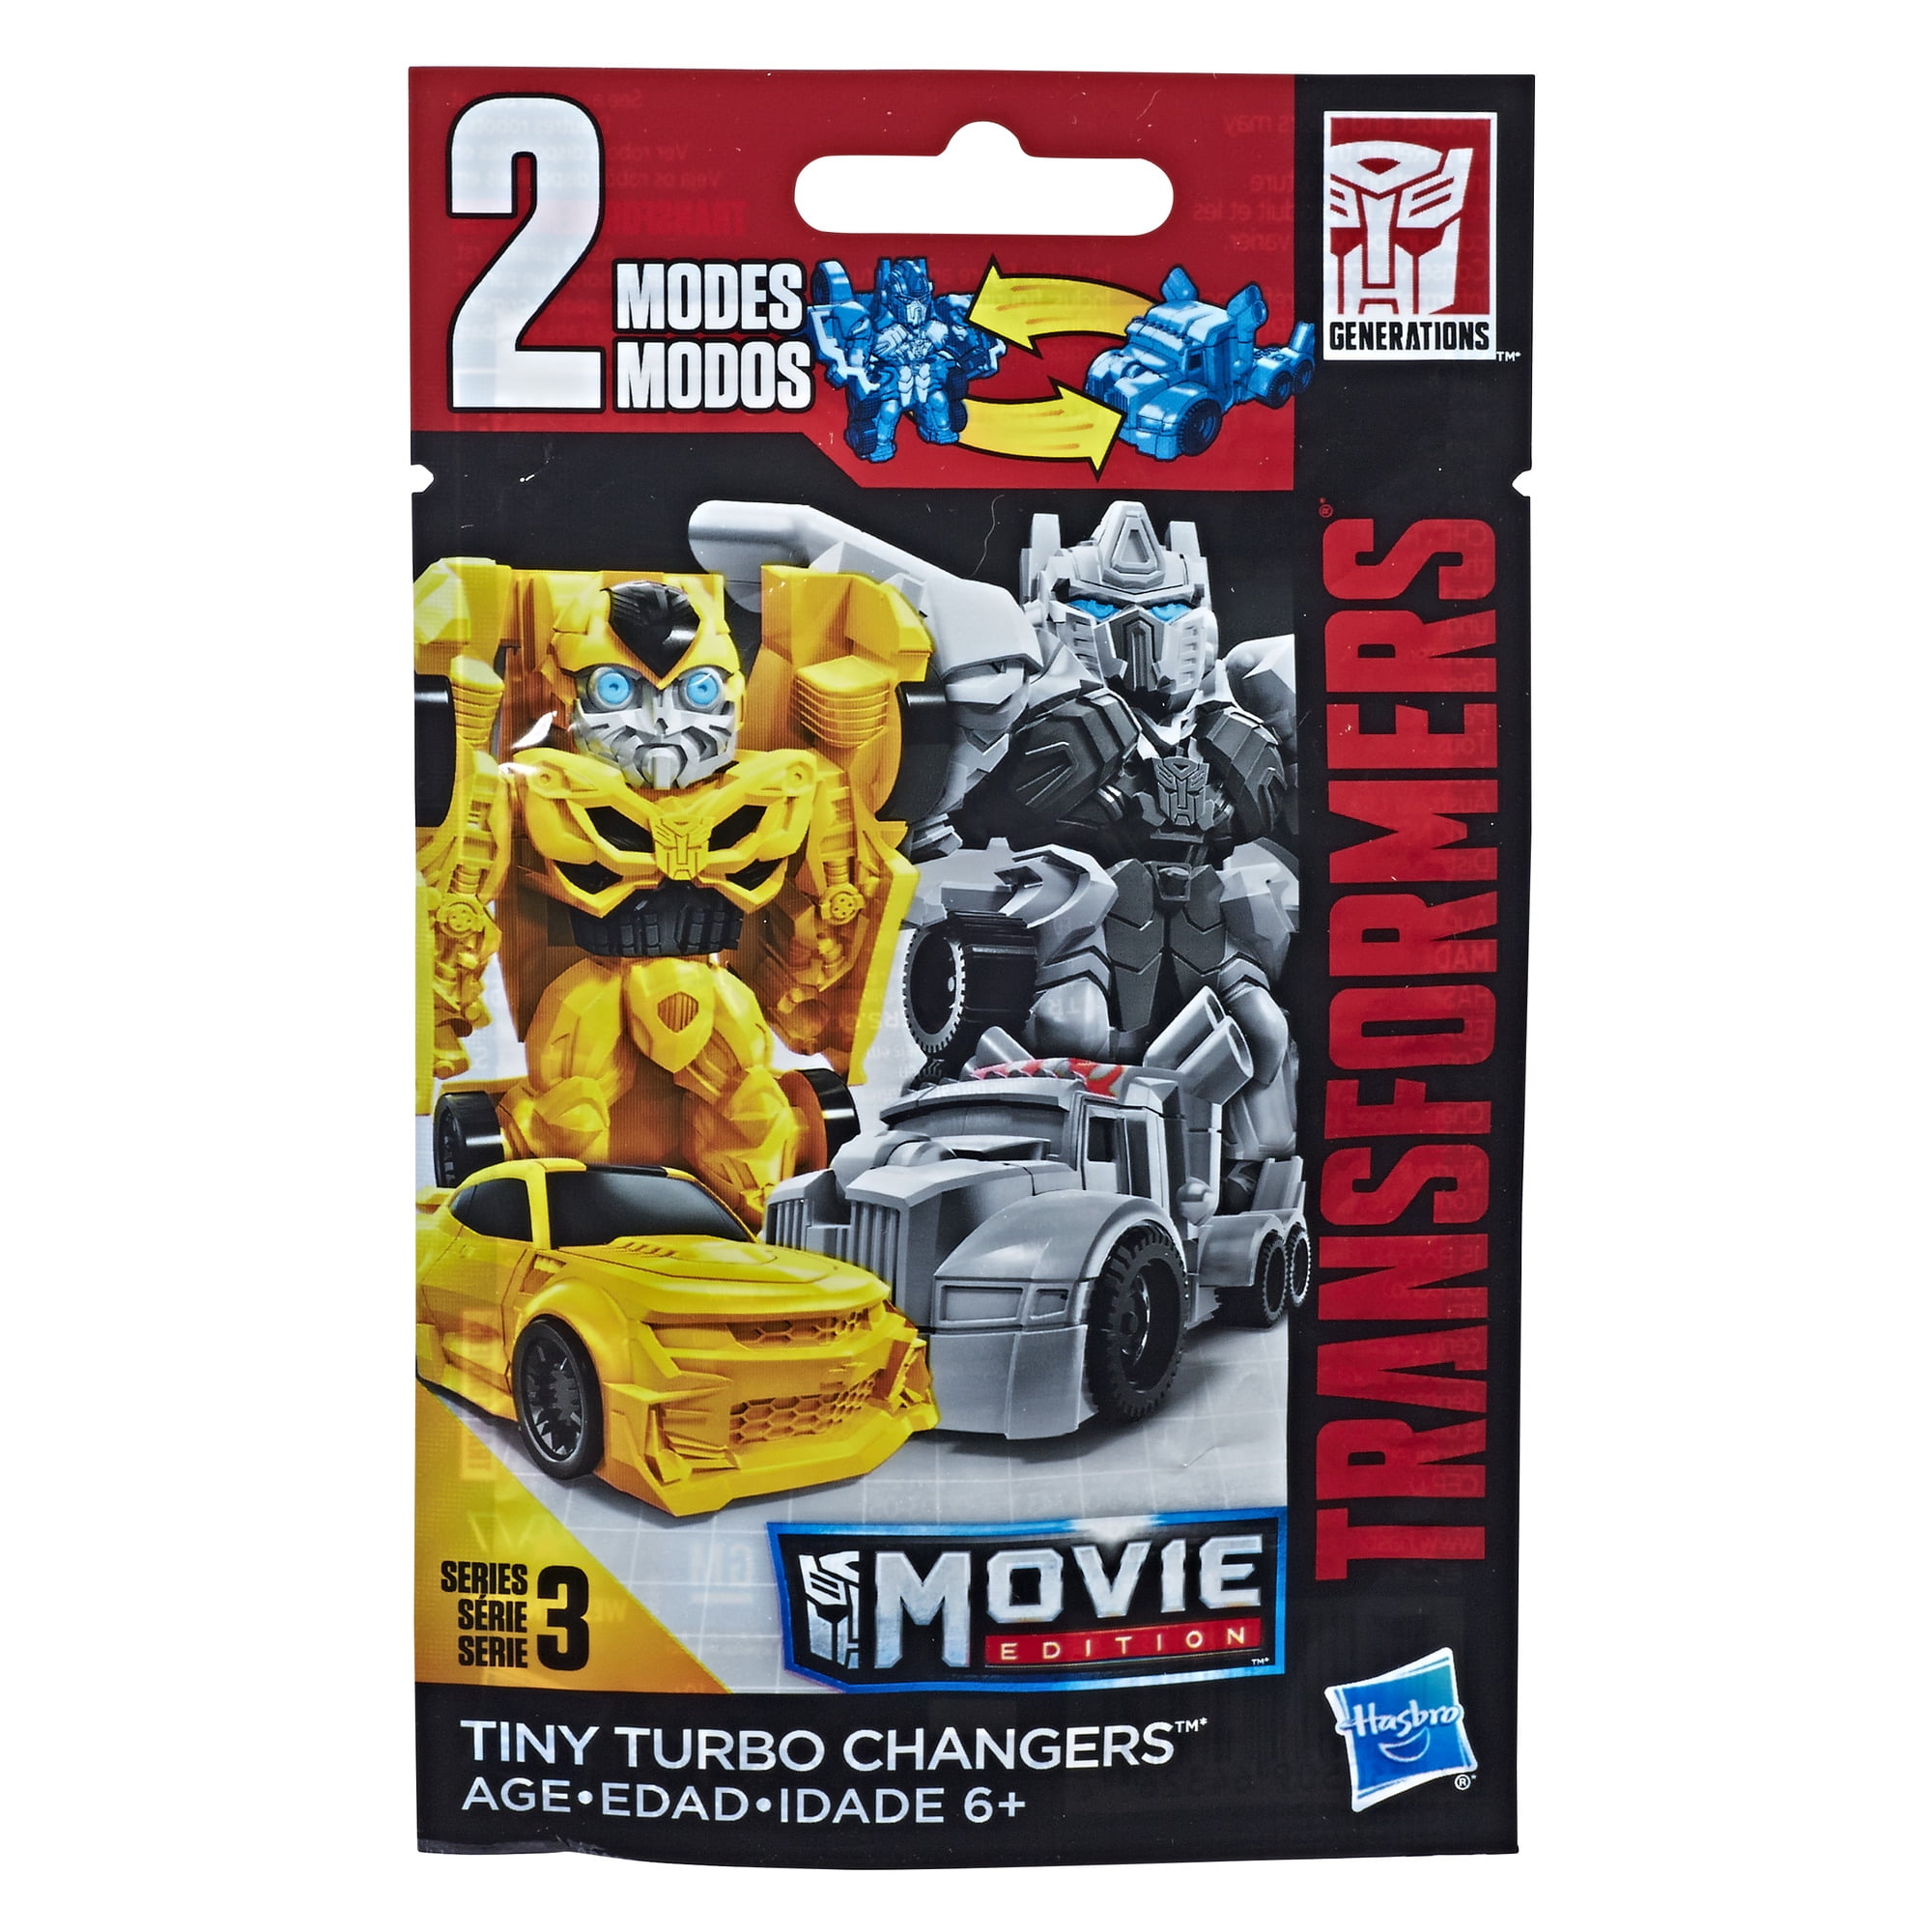 3 Blind Packs Tiny Turbo Changers Bumblebee Transformers Movie Edition Hasbro 